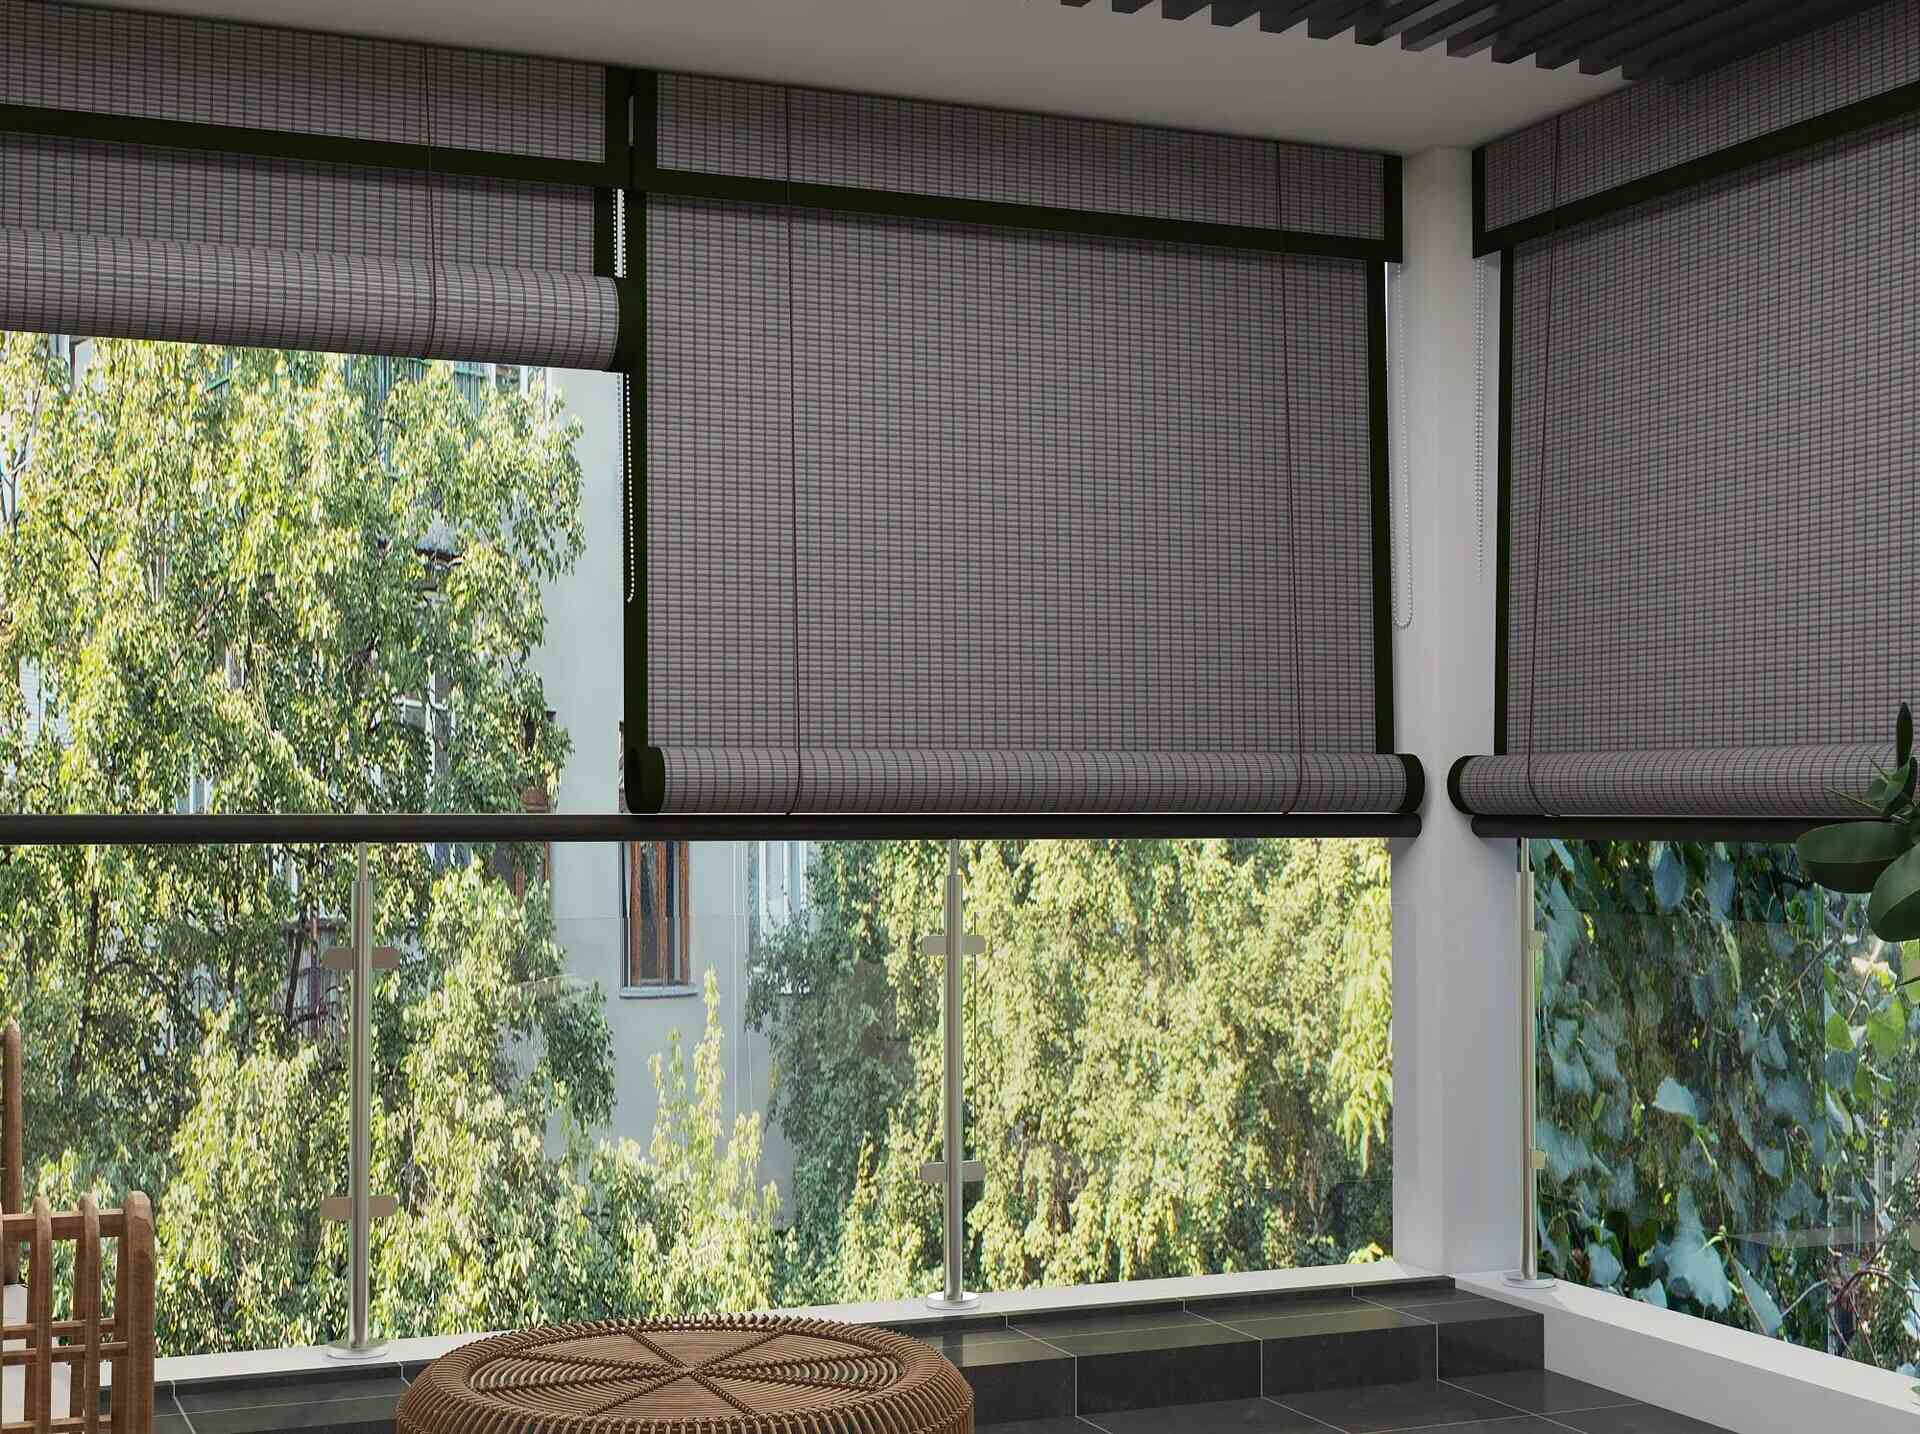 How To Cut PVC Blinds?